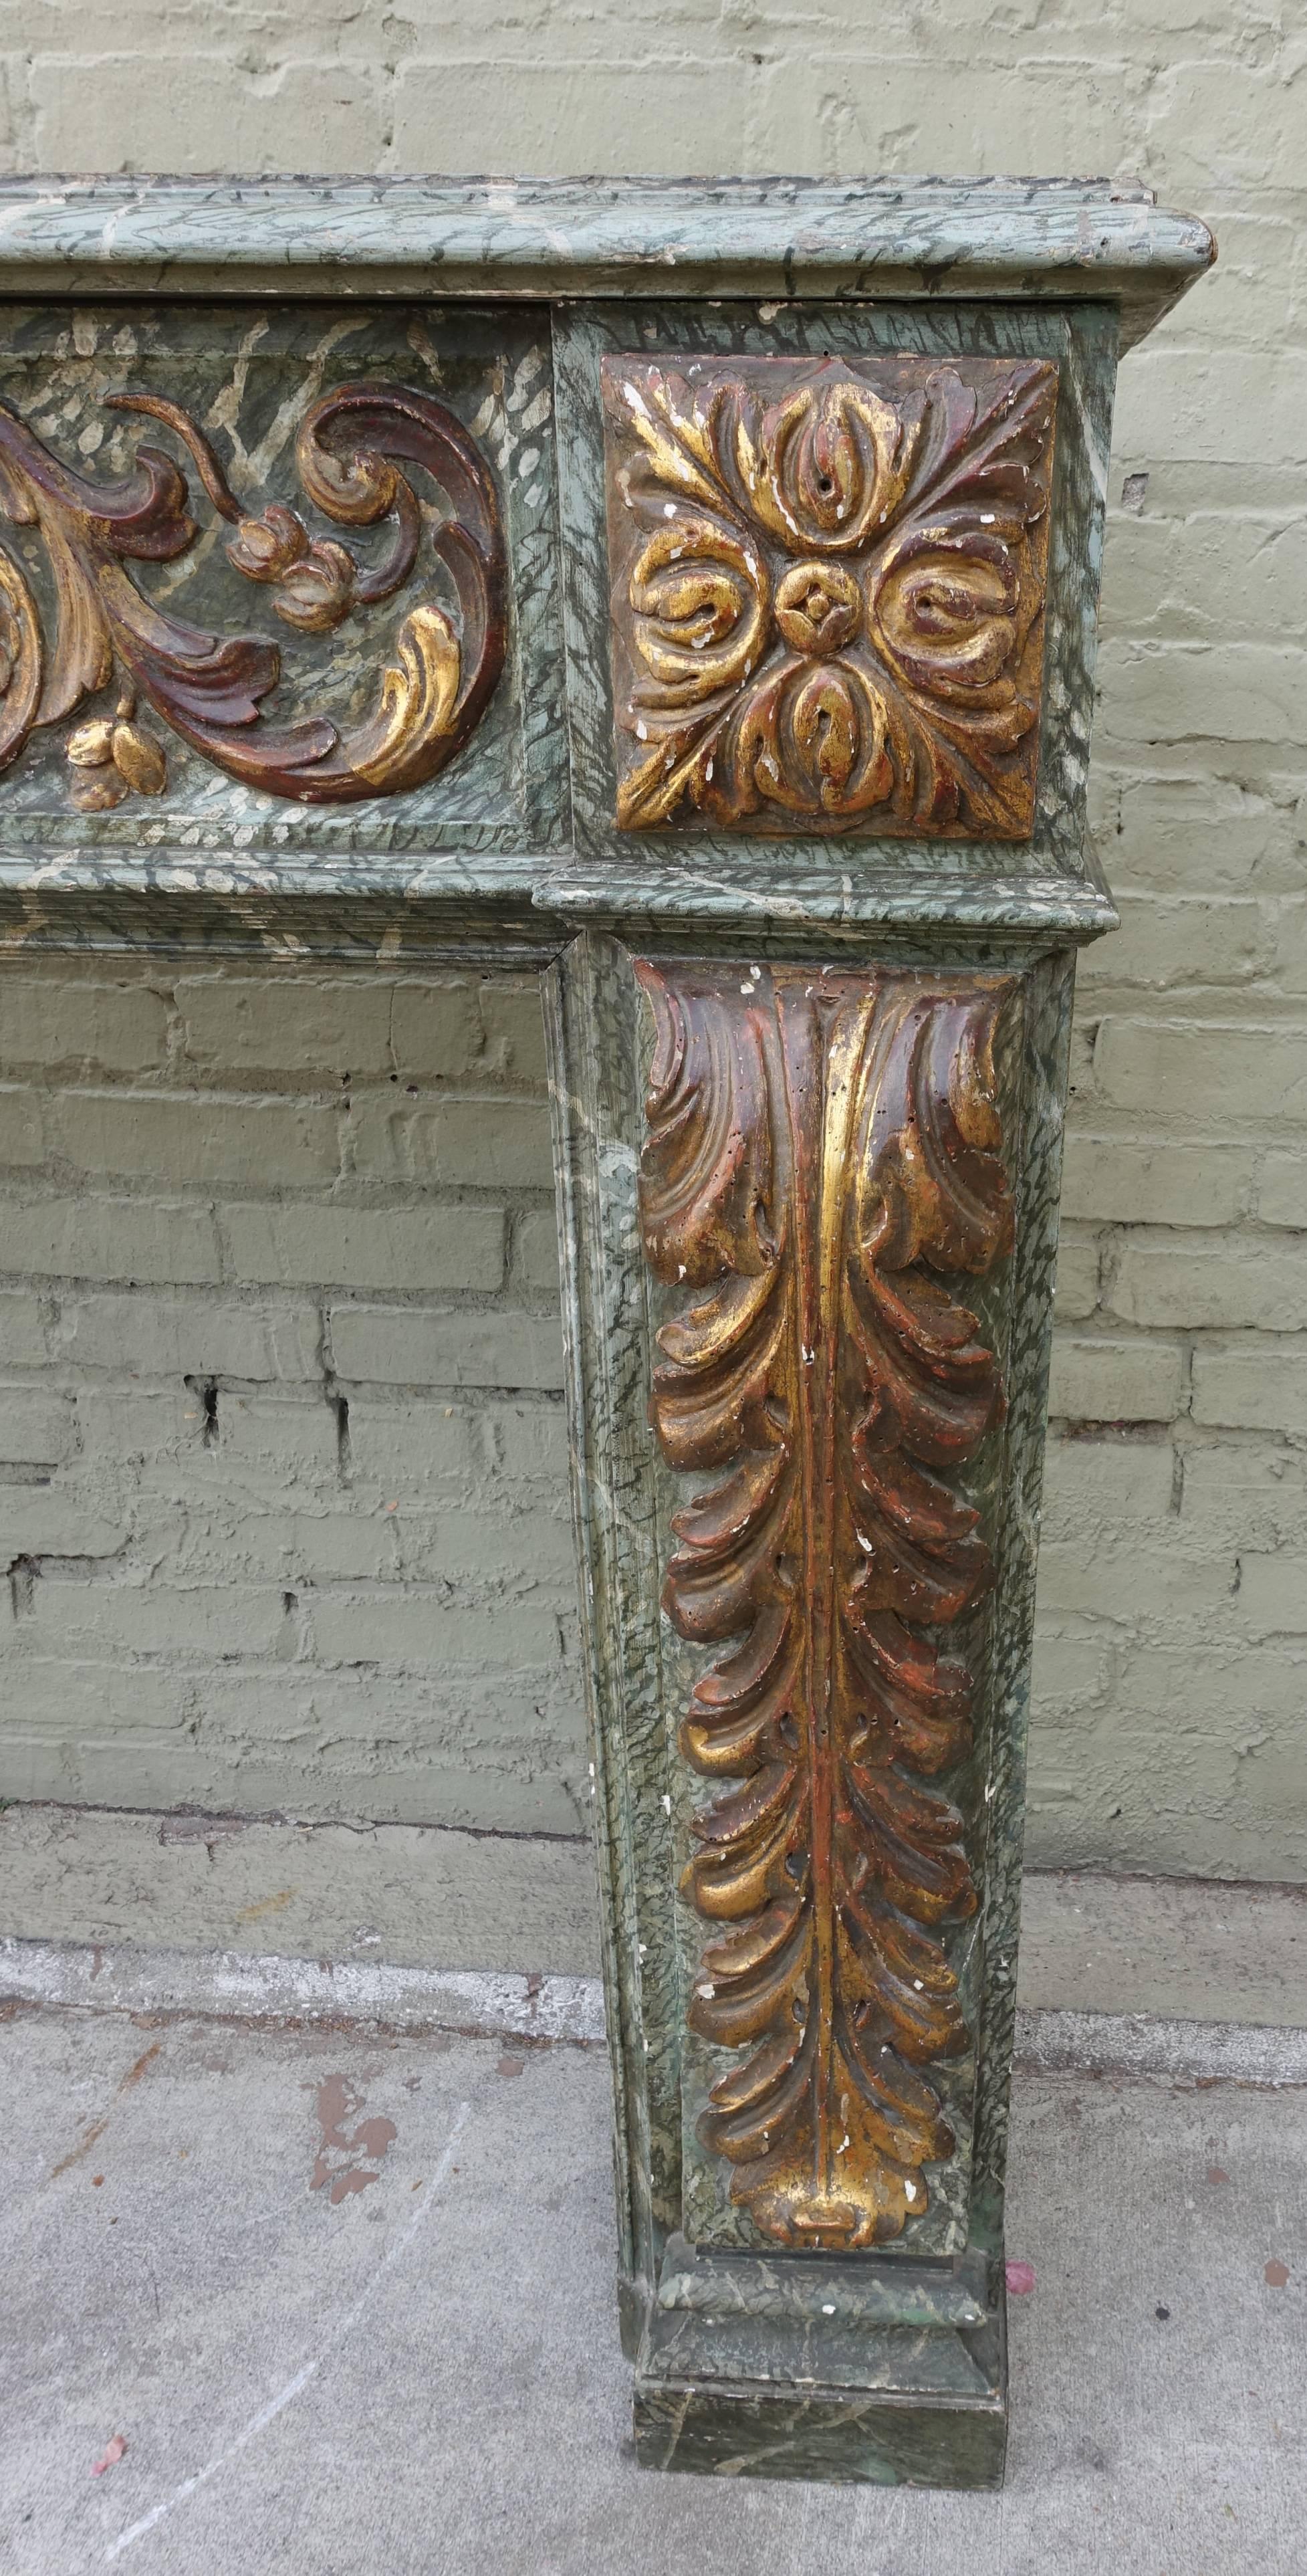 19th century Italian carved and giltwood faux marble fireplace mantel. Detailed with a center urn with swirling flowers and acanthus leaves throughout.